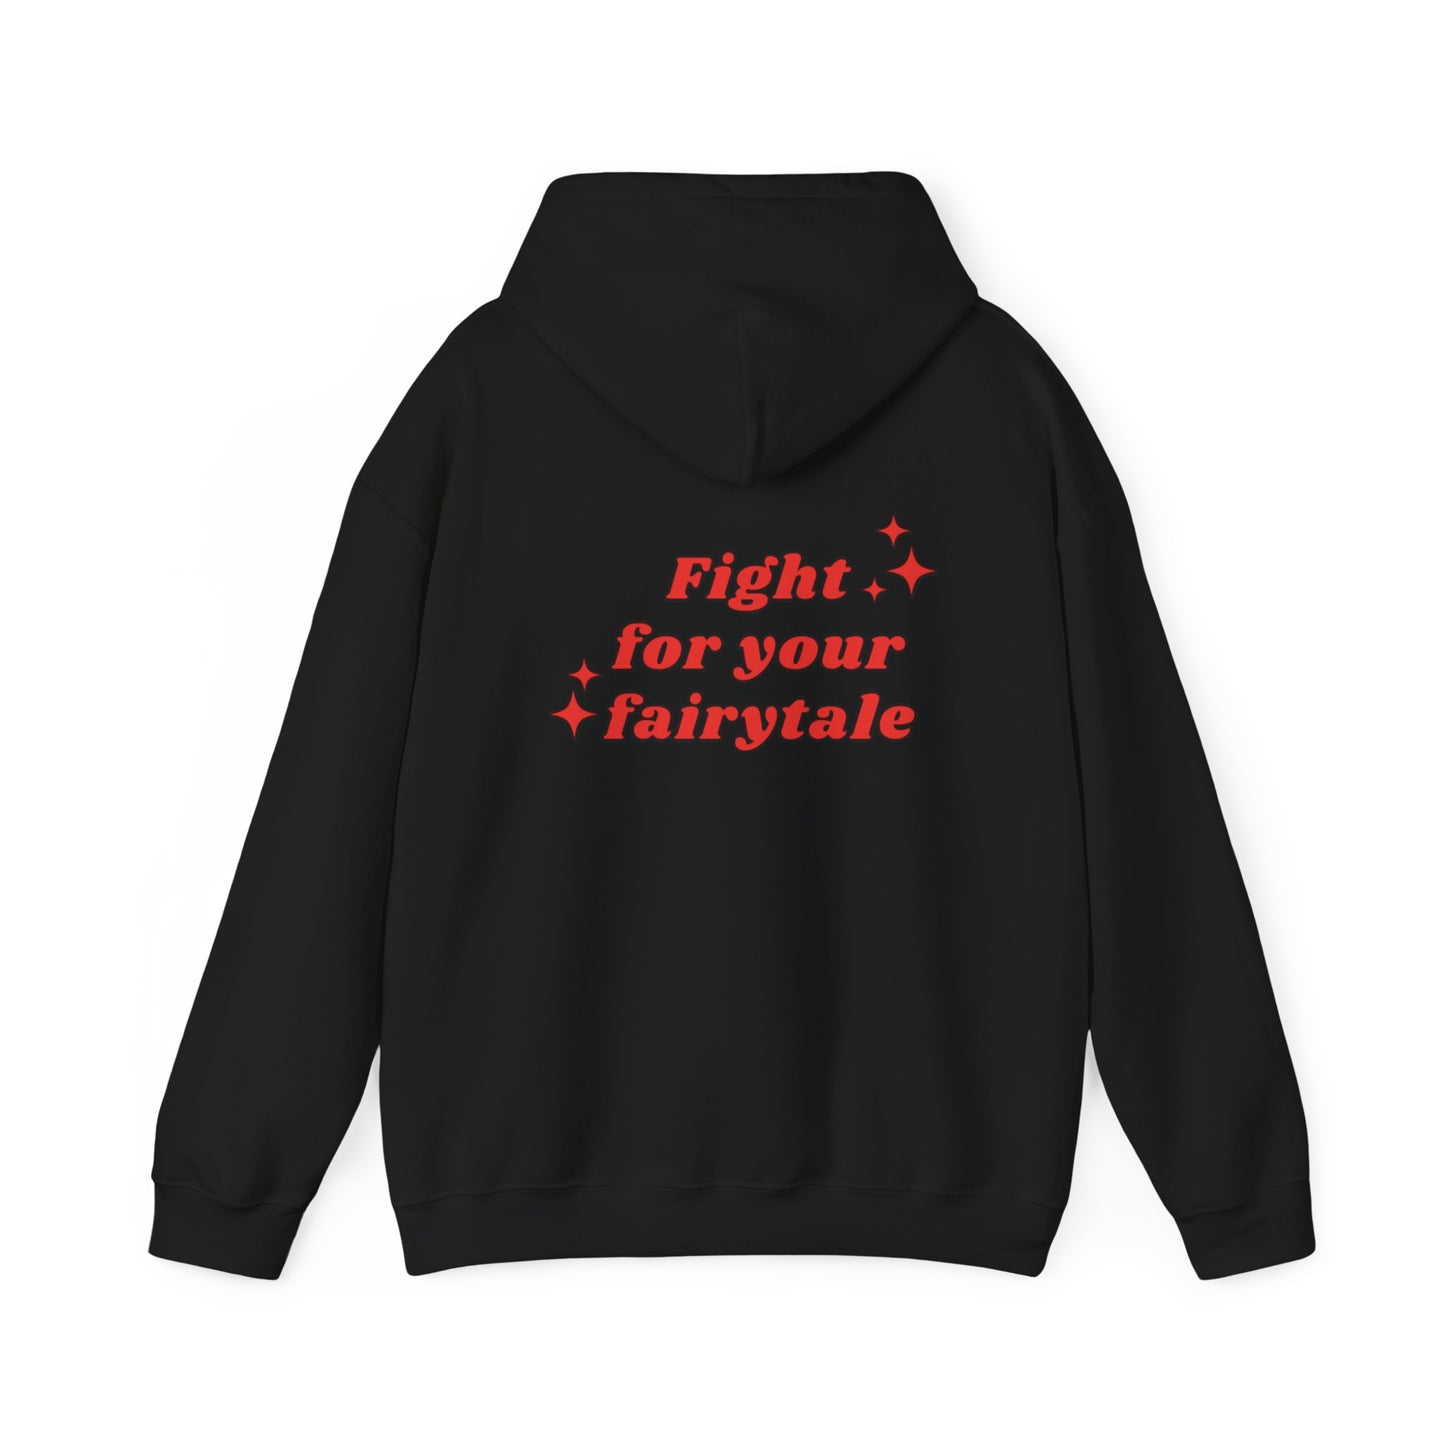 Fight for your Fairytale Hooded Sweatshirt